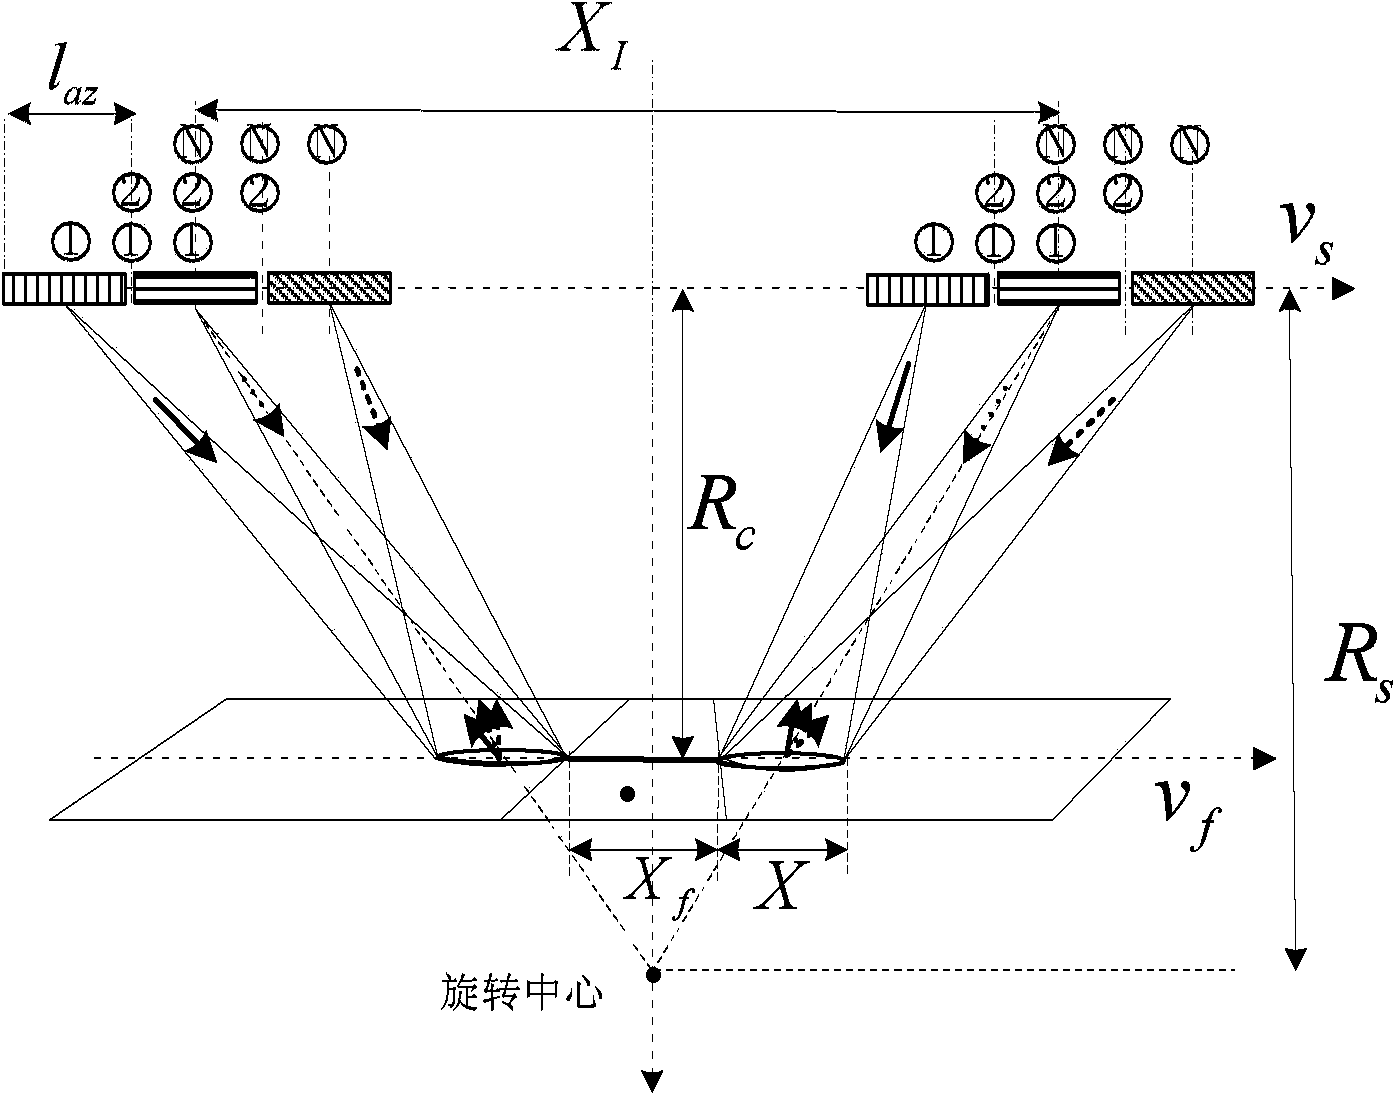 Implementation method of high resolution and wide swath spaceborne SAR (Synthetic Aperture Radar) system